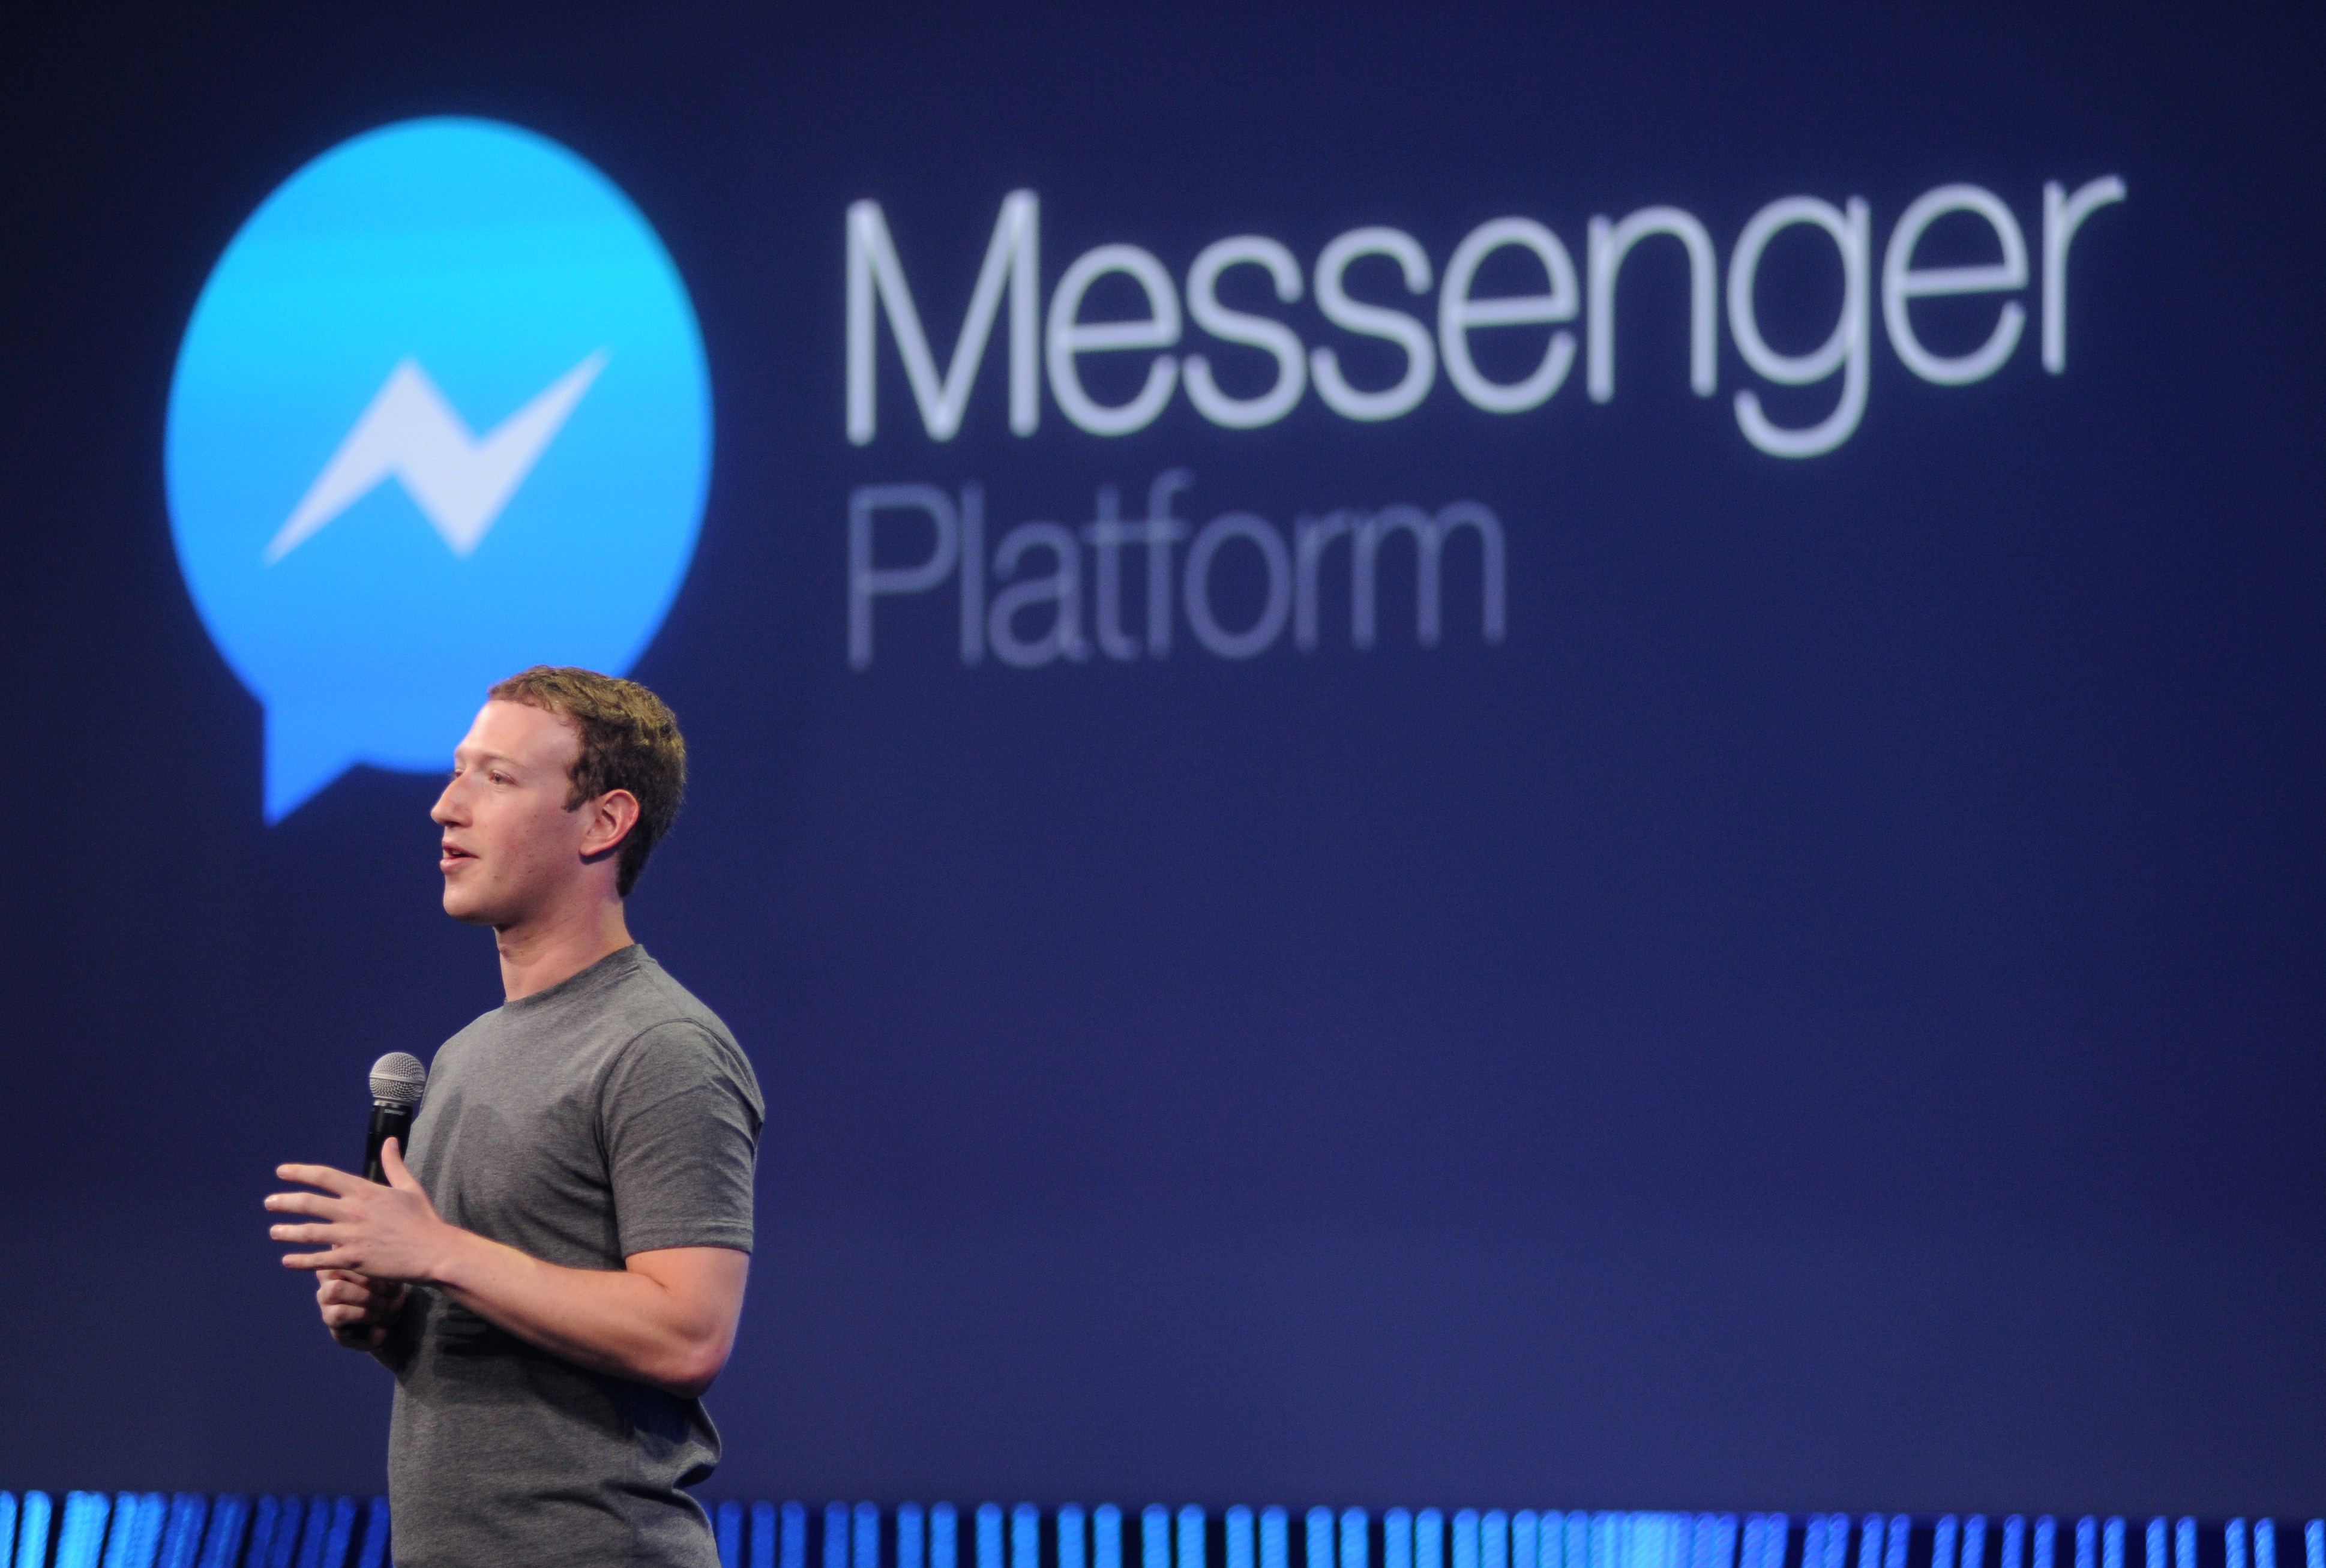 Facebook CEO Mark Zuckerberg introduces a new messenger platform at the F8 summit in San Francisco, California, on March 25, 2015. AFP PHOTO/JOSH EDELSON        (Photo credit should read Josh Edelson/AFP/Getty Images) (JOSH EDELSON&mdash;AFP/Getty Images)